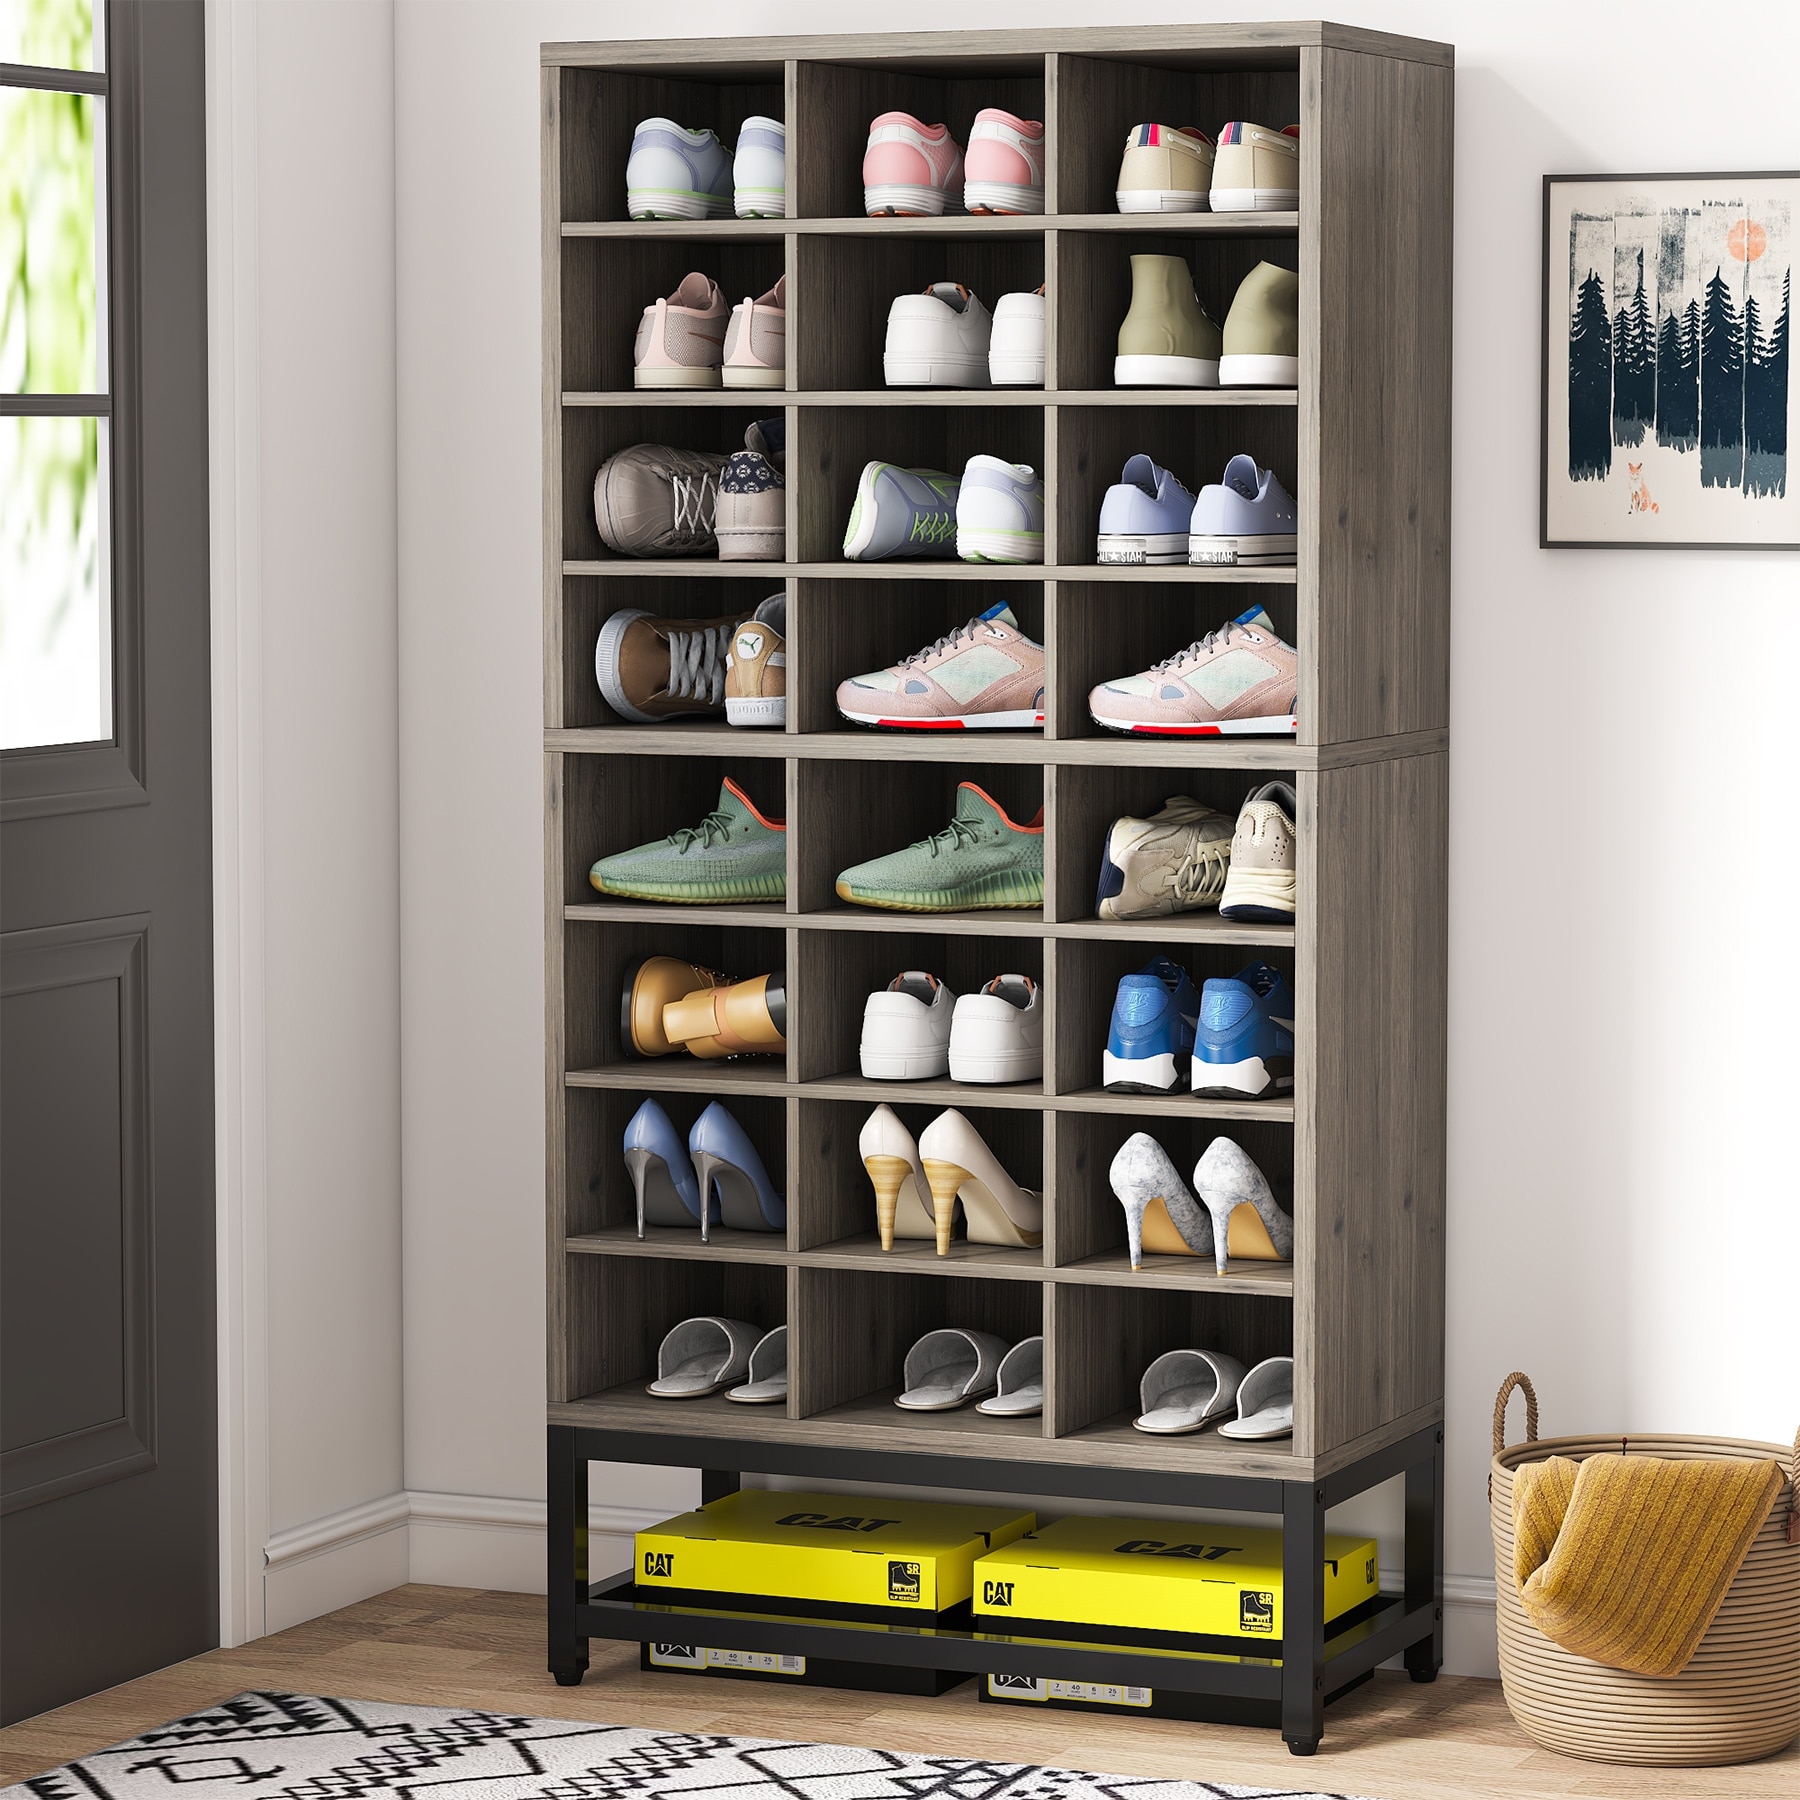 https://ak1.ostkcdn.com/images/products/is/images/direct/1e0607a96a6aea0e2a3f62b41d6f6fffd72118bb/Shoe-Storage-Rack%2C-24-Pair-Shoe-Storage-Cabinet-for-Entryway.jpg